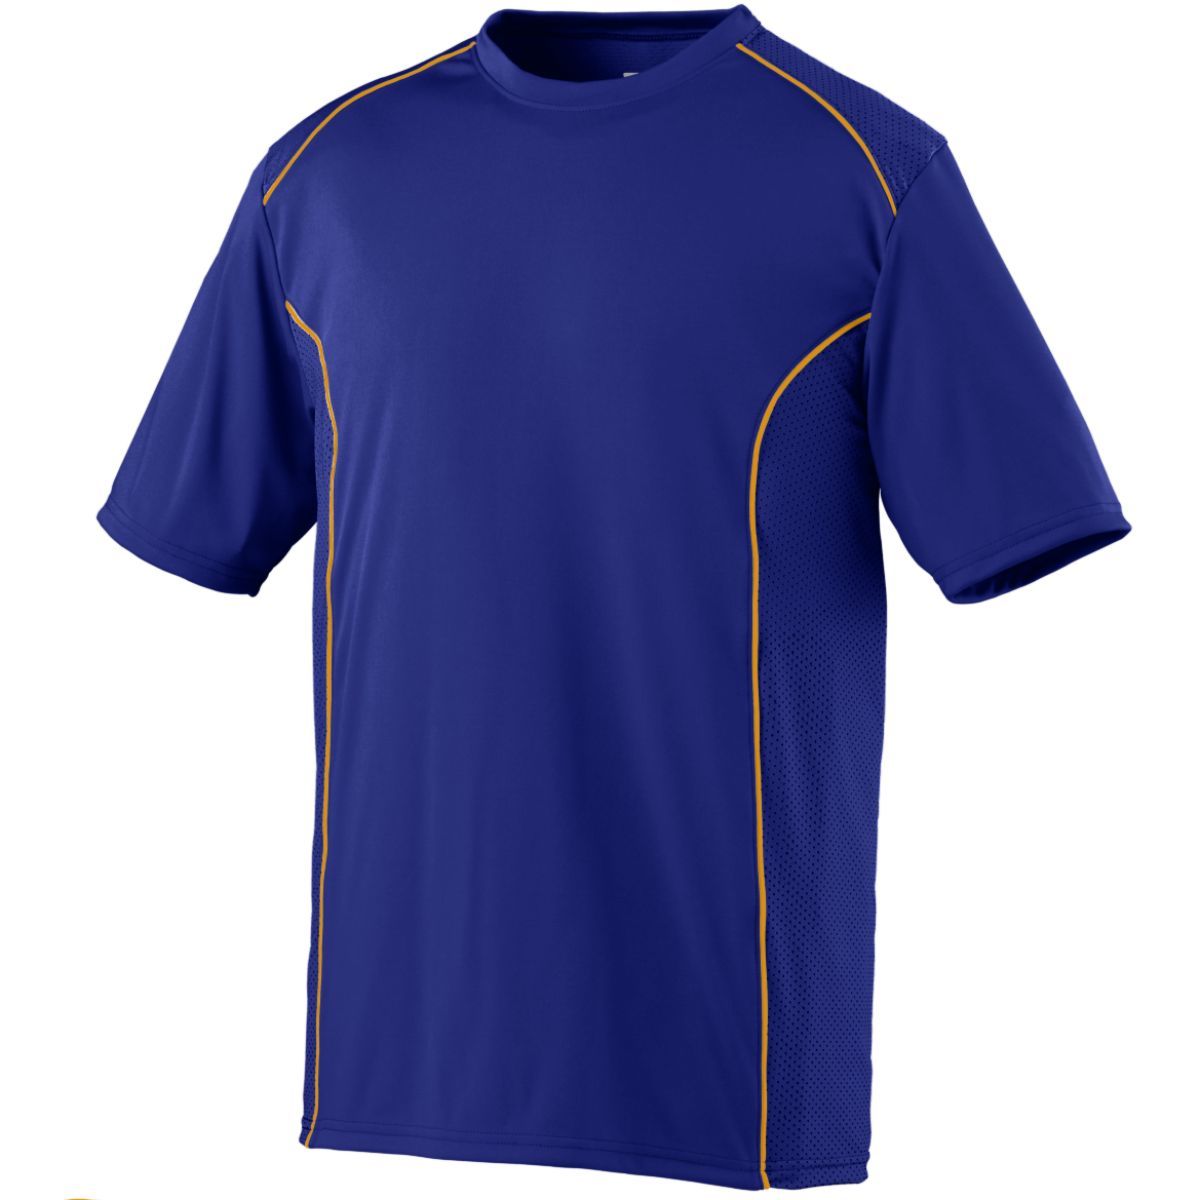 Augusta Sportswear Youth Winning Streak Crew in Purple/Gold  -Part of the Youth, Augusta-Products, Soccer, All-Sports-1 product lines at KanaleyCreations.com